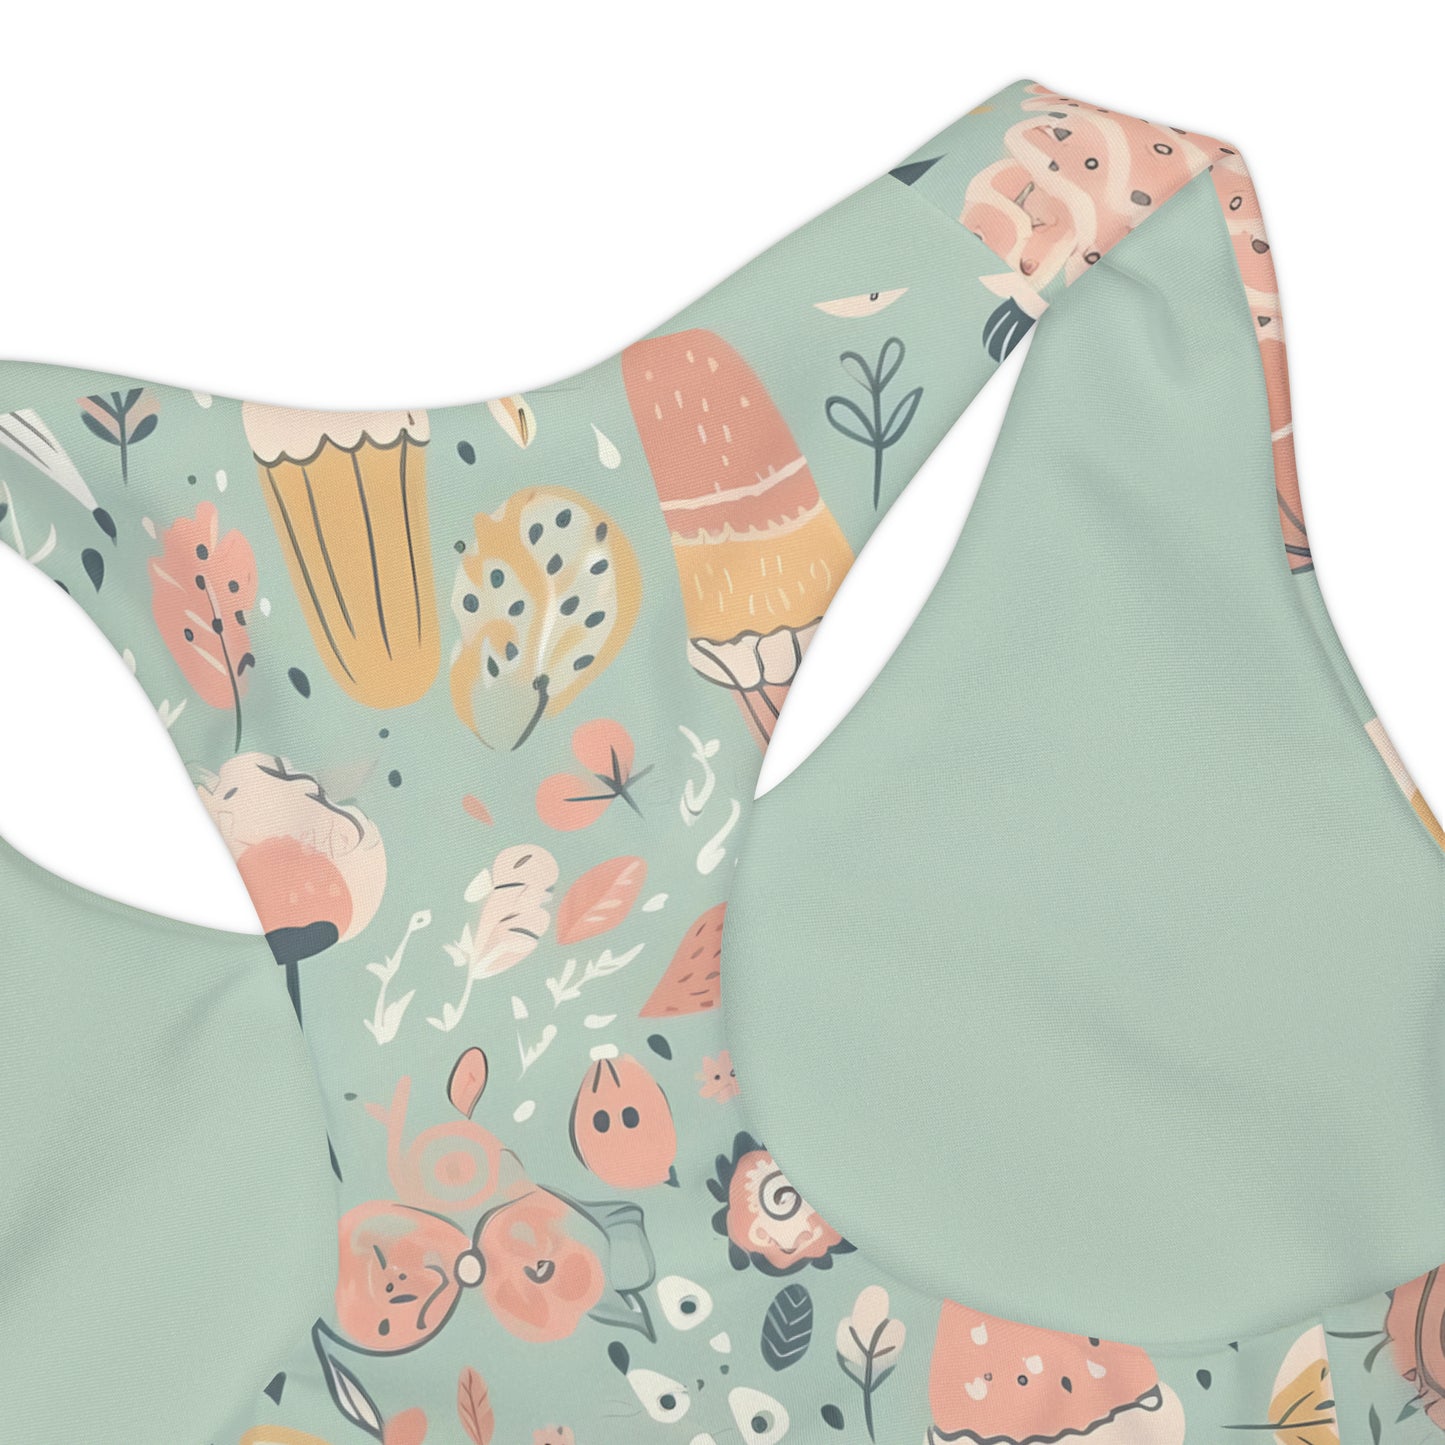 Blooming Petals Girls Two Piece Swimsuit